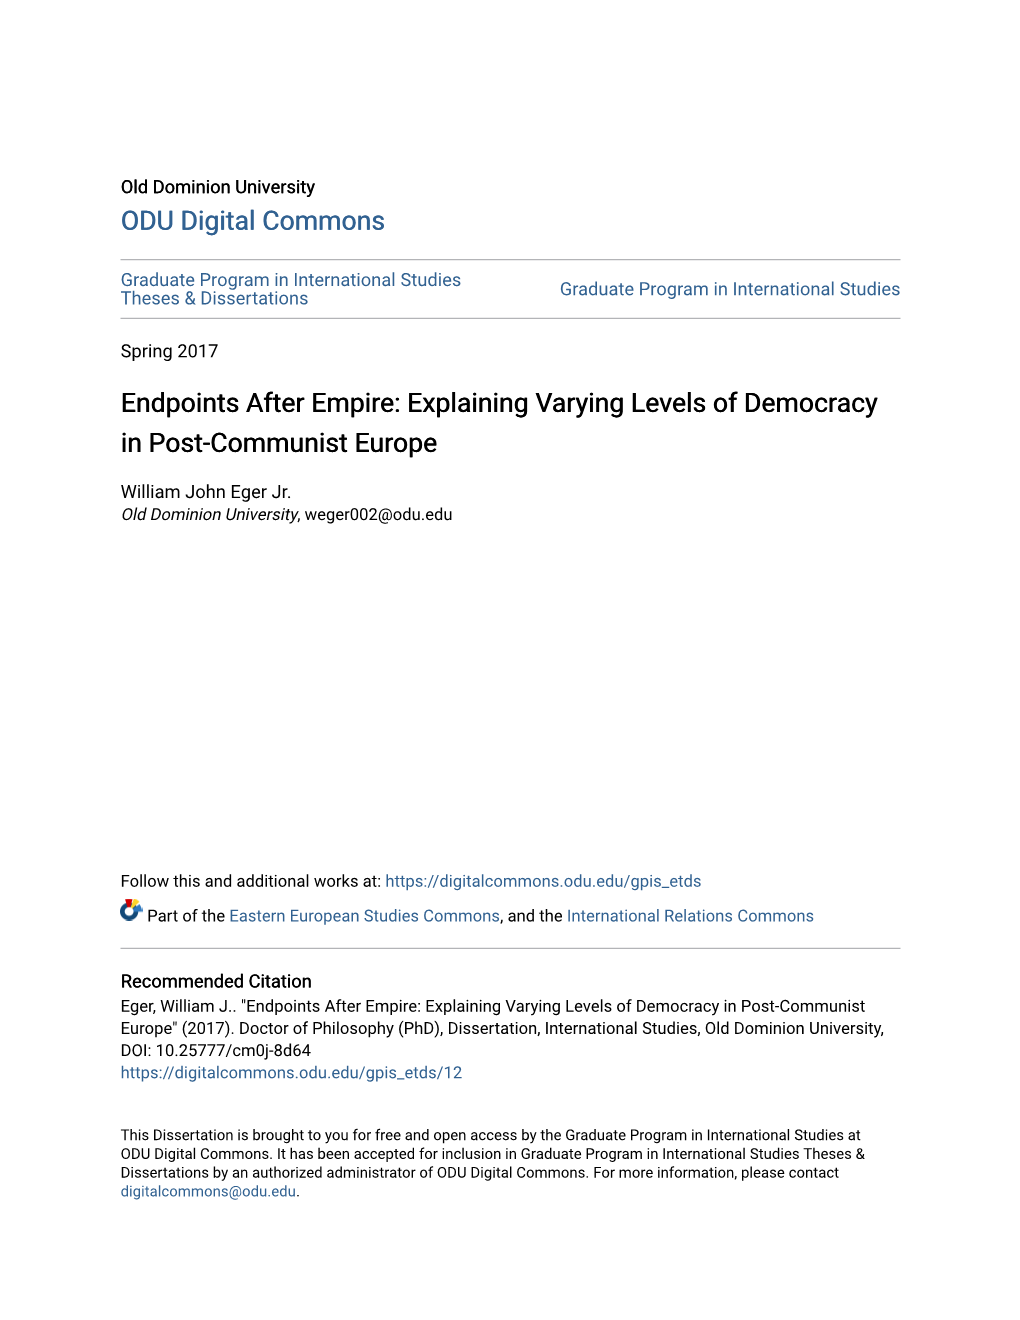 Endpoints After Empire: Explaining Varying Levels of Democracy in Post-Communist Europe